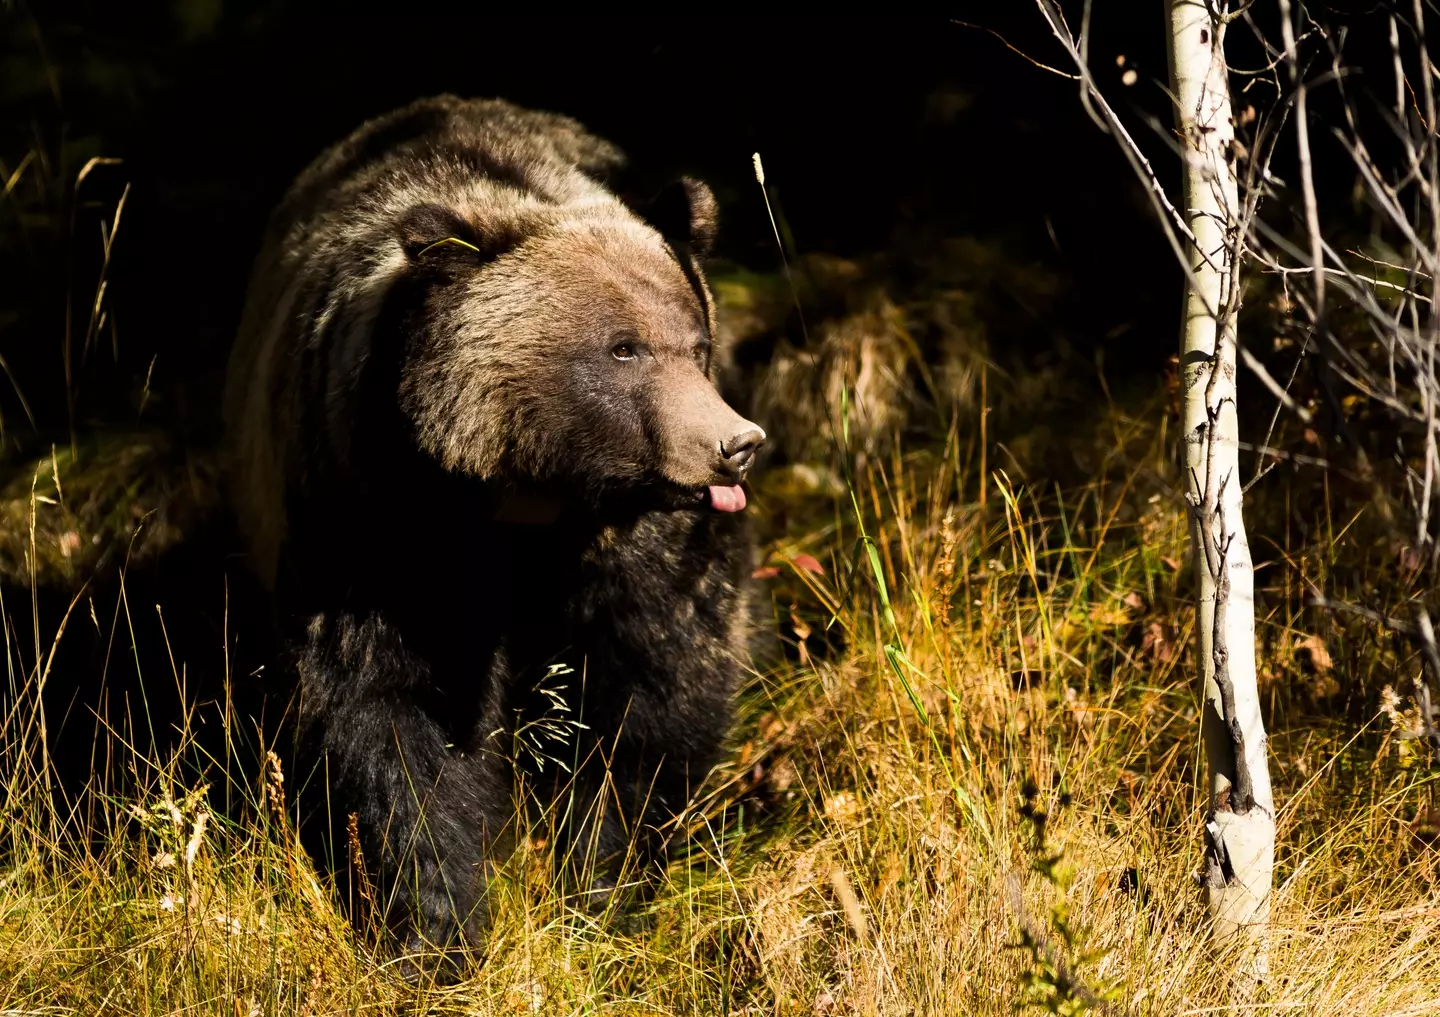 A grizzly bear in Banff National Park.